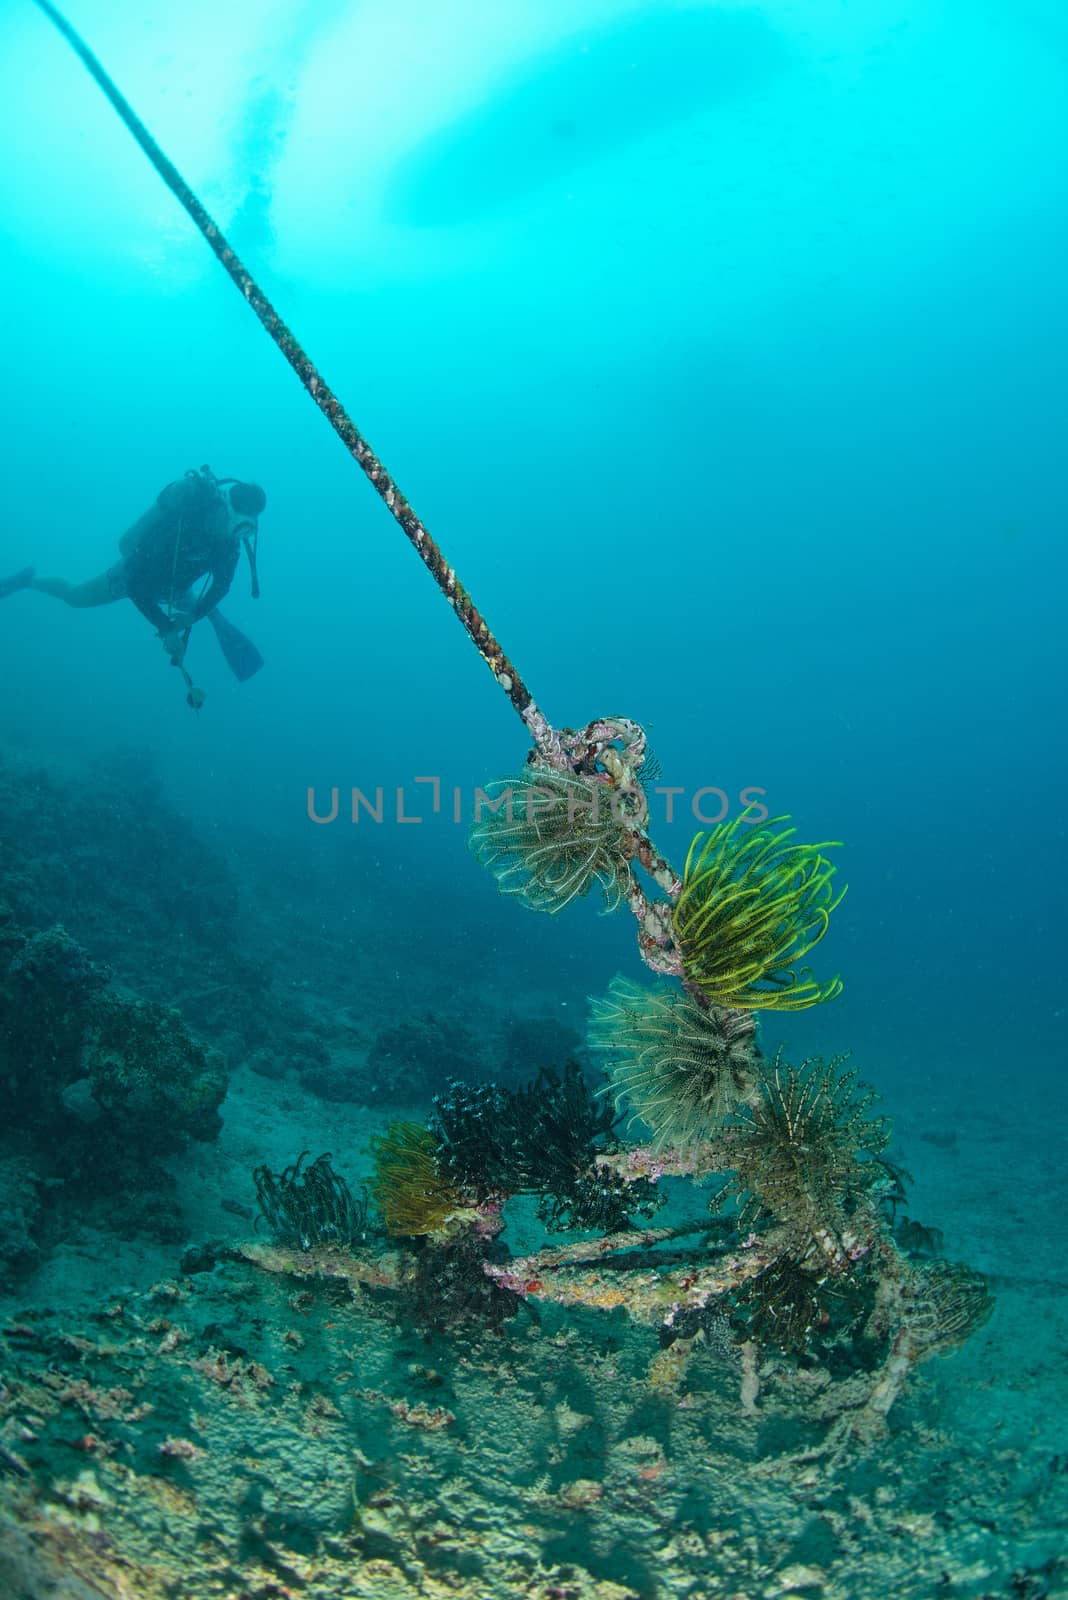 Feather Star (Sp. Unknown) on rope. Mabul, Sipadan, Borneo, Mala by think4photop